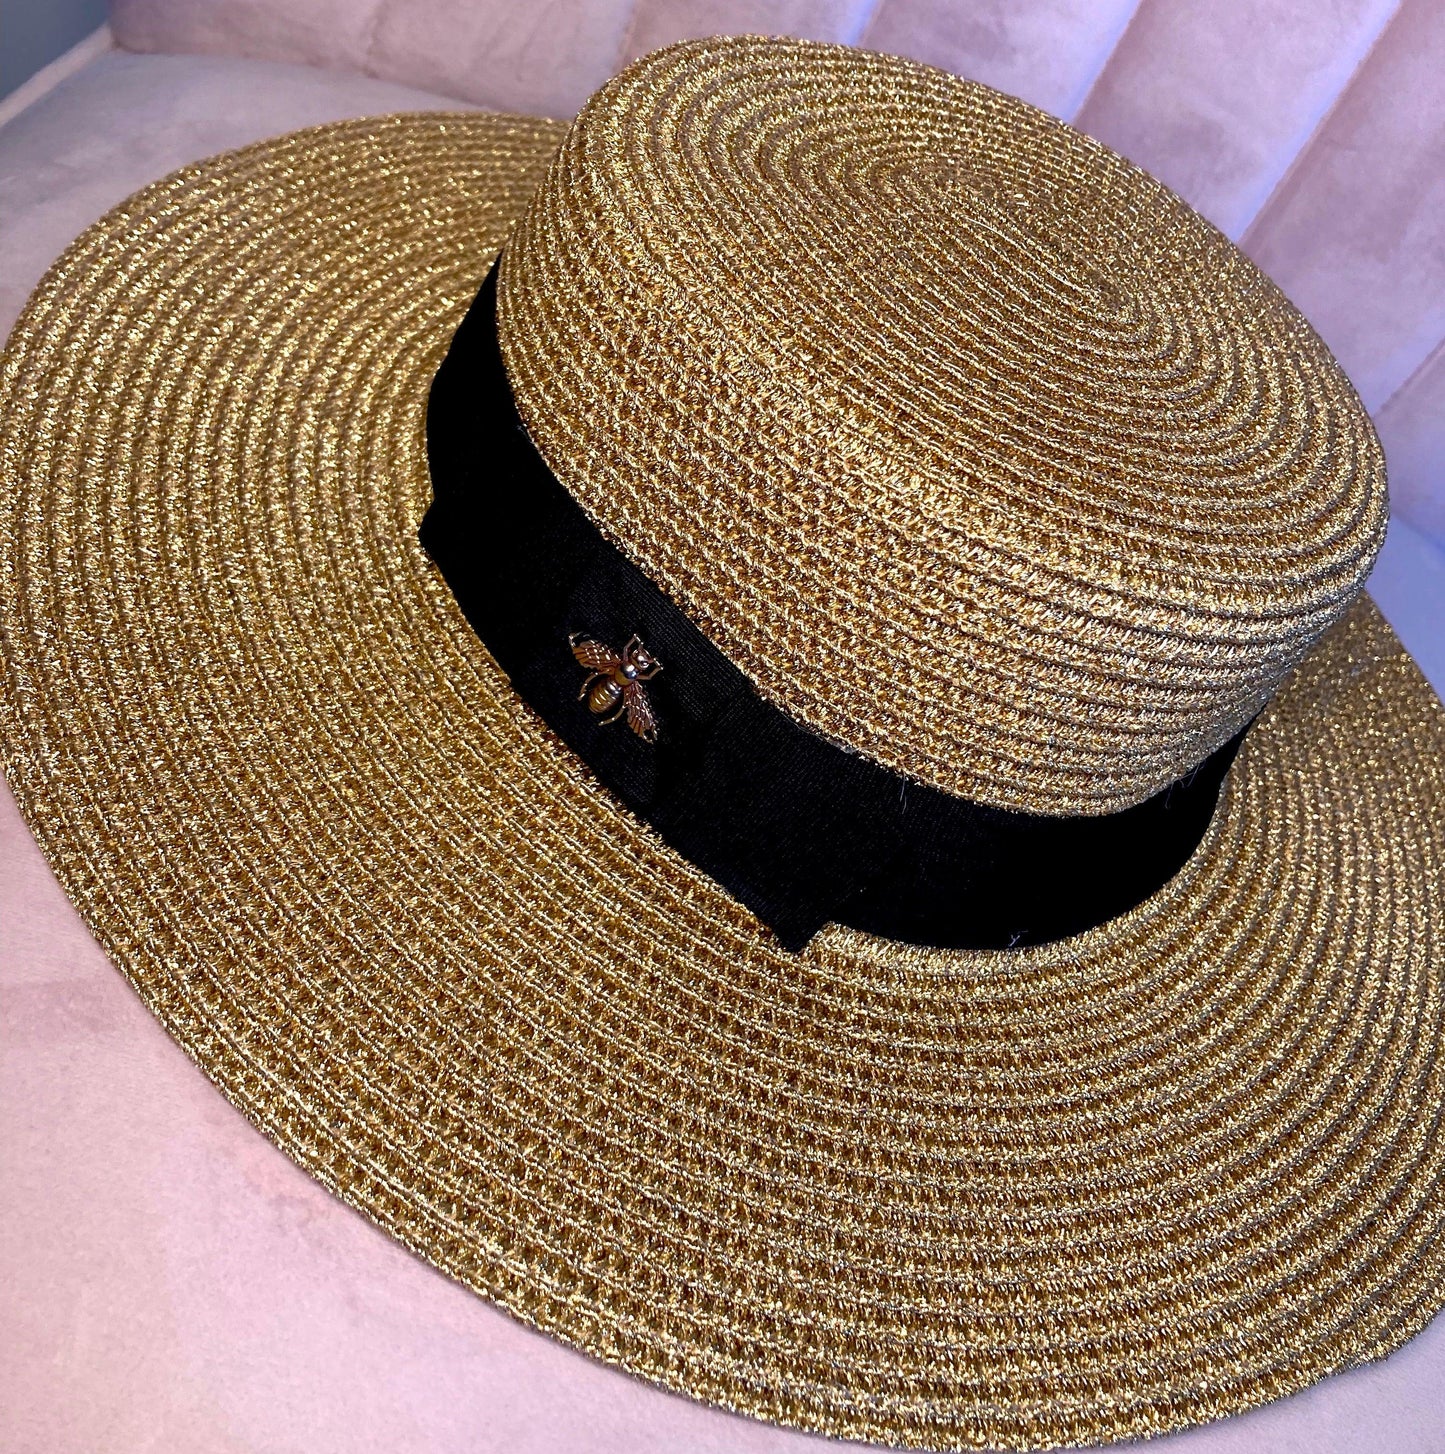 Straw Summer Hat with a gold, shiny Bee and Black Ribbon from Above